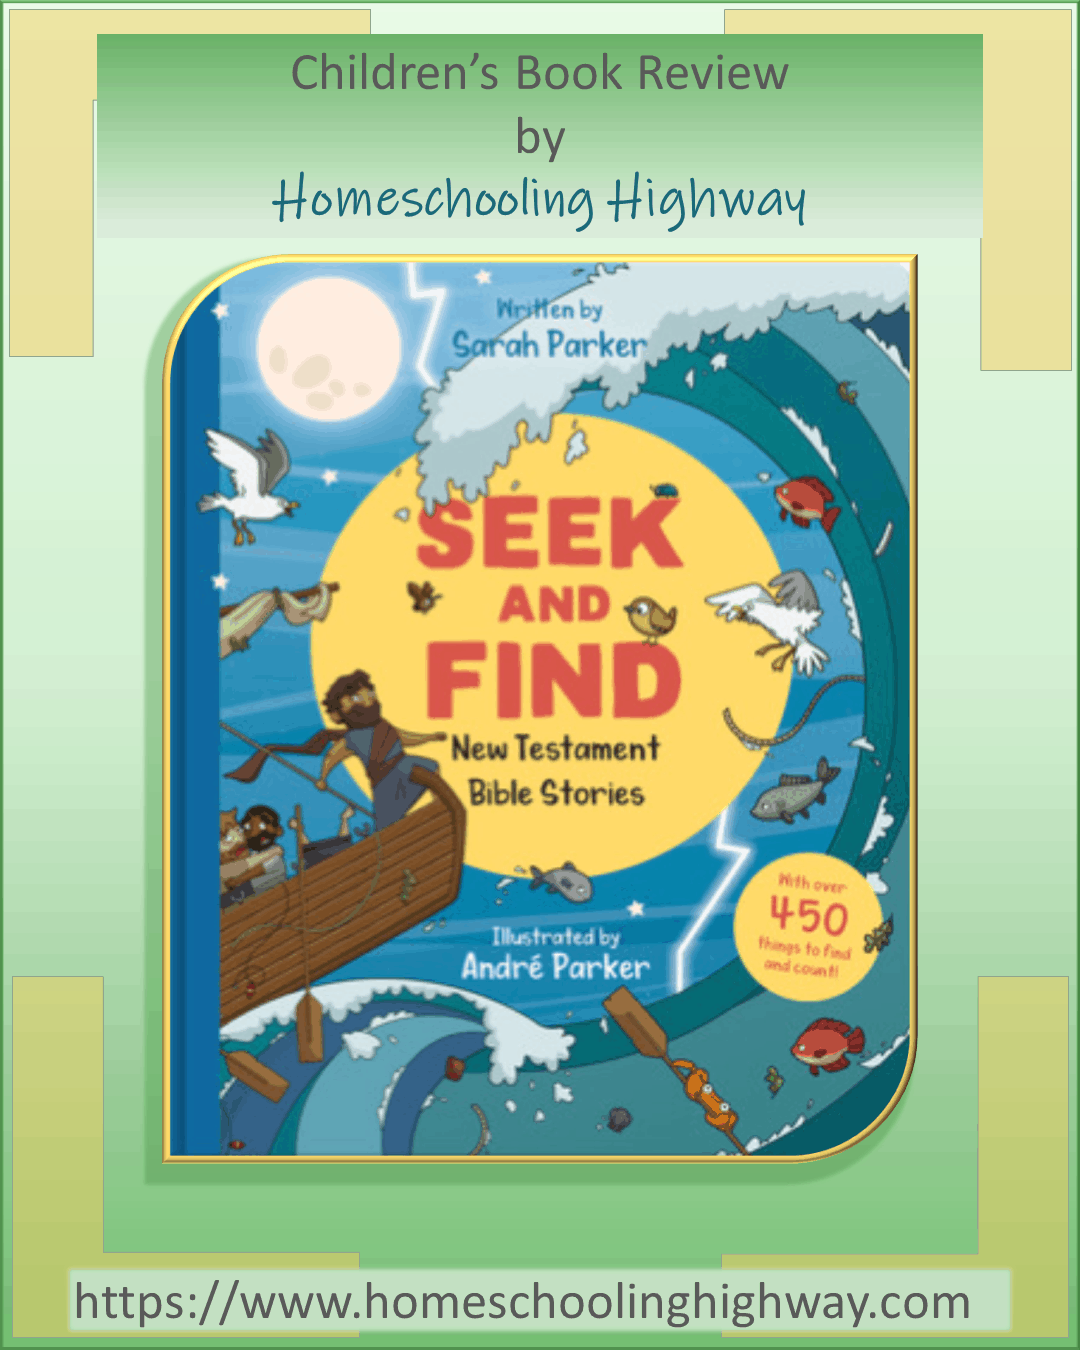 Seek and Find: New Testament Bible Stories. A Children's Book Review by Homeschooling Highway